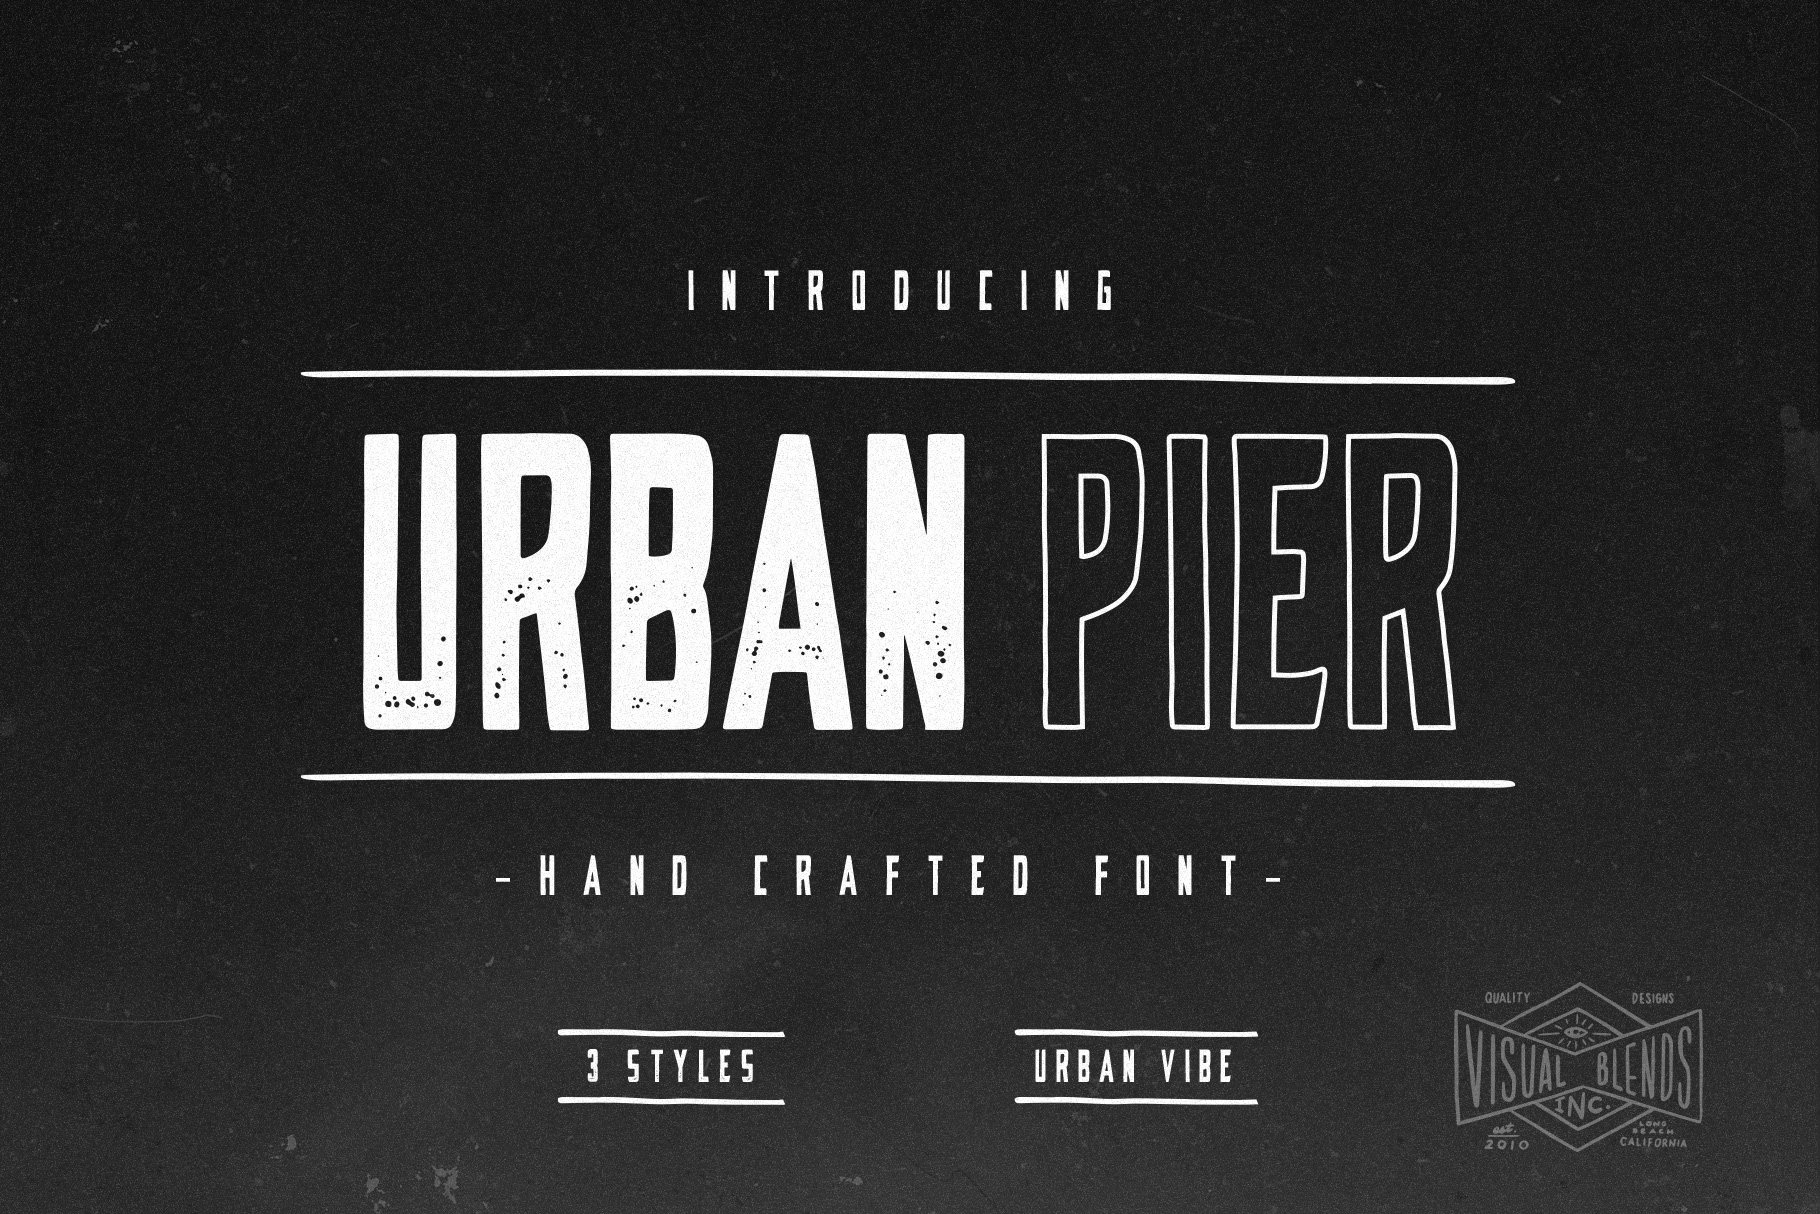 Urban Pier- Handcrafted Display Font cover image.